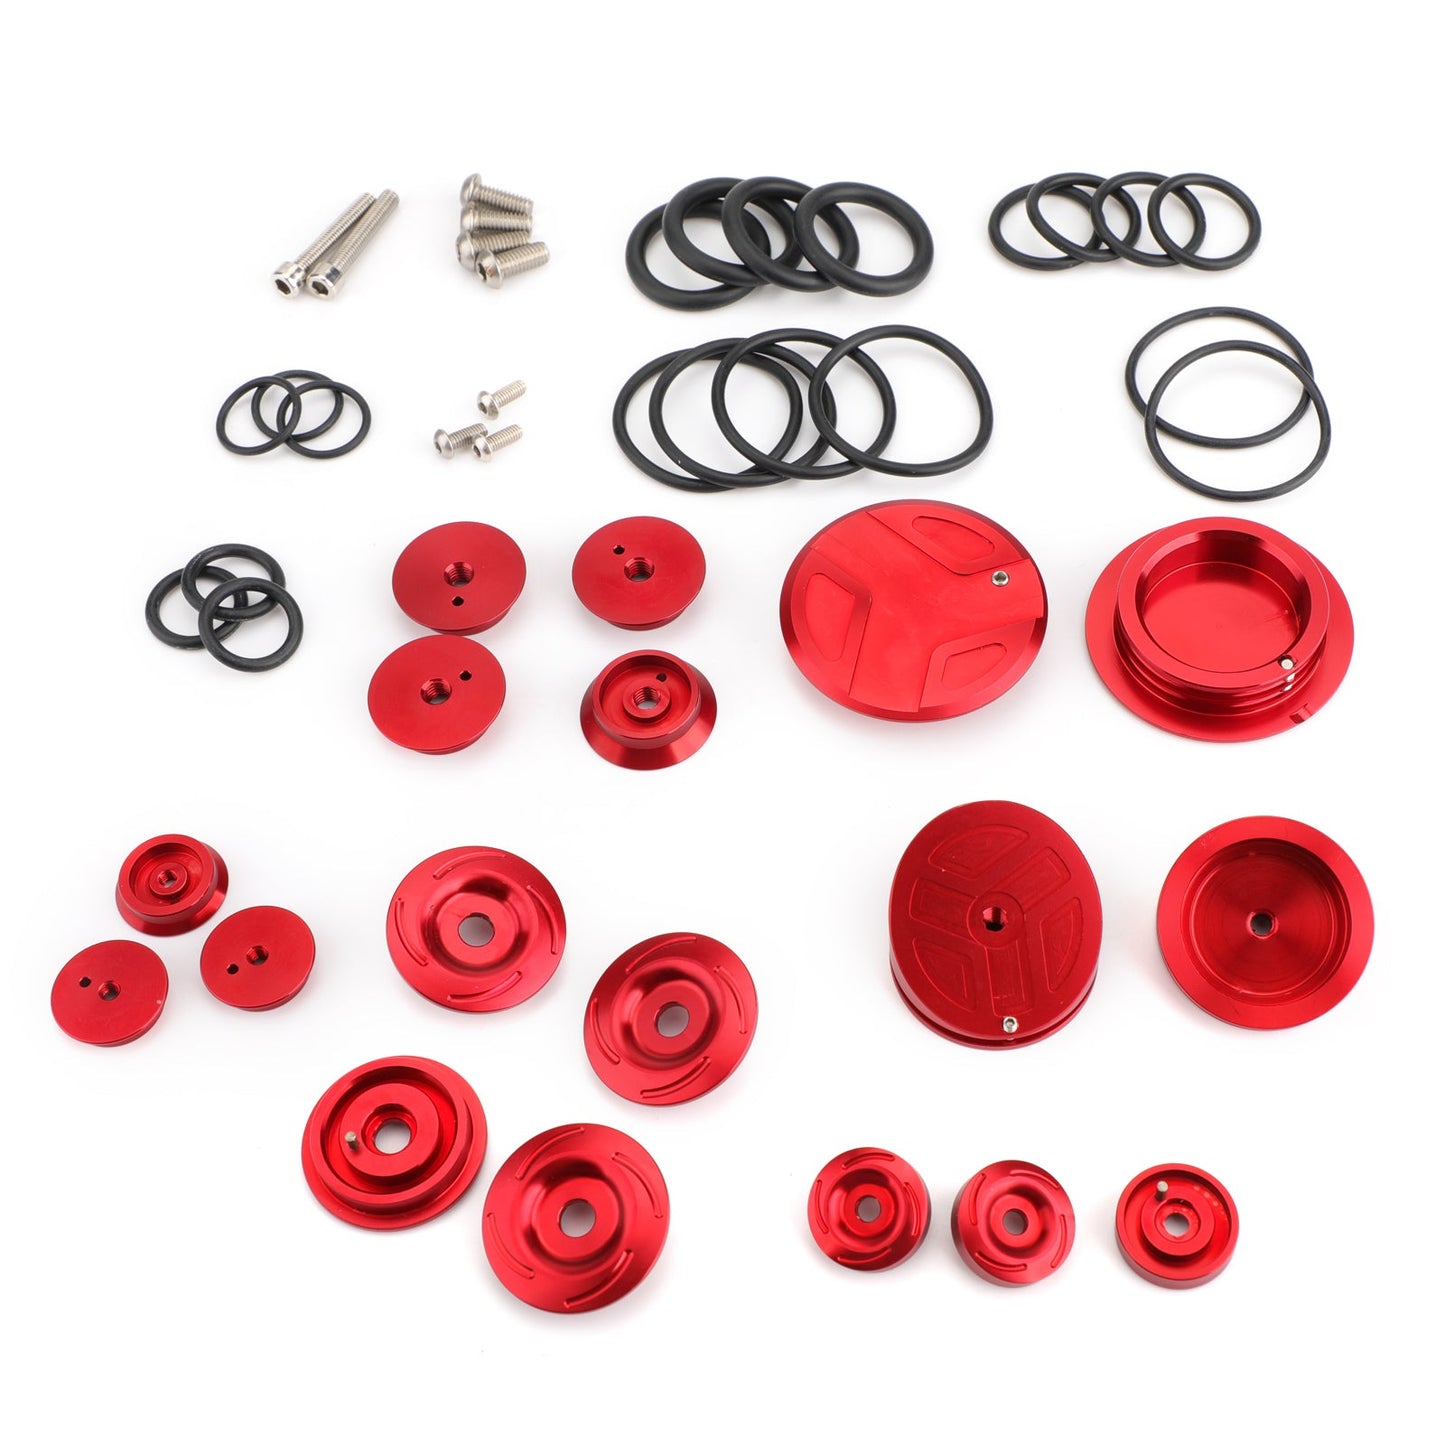 Upper Frame Plugs Caps Covers Set CNC Aluminum For BMW R1200GS ADV LC 13-19 Red